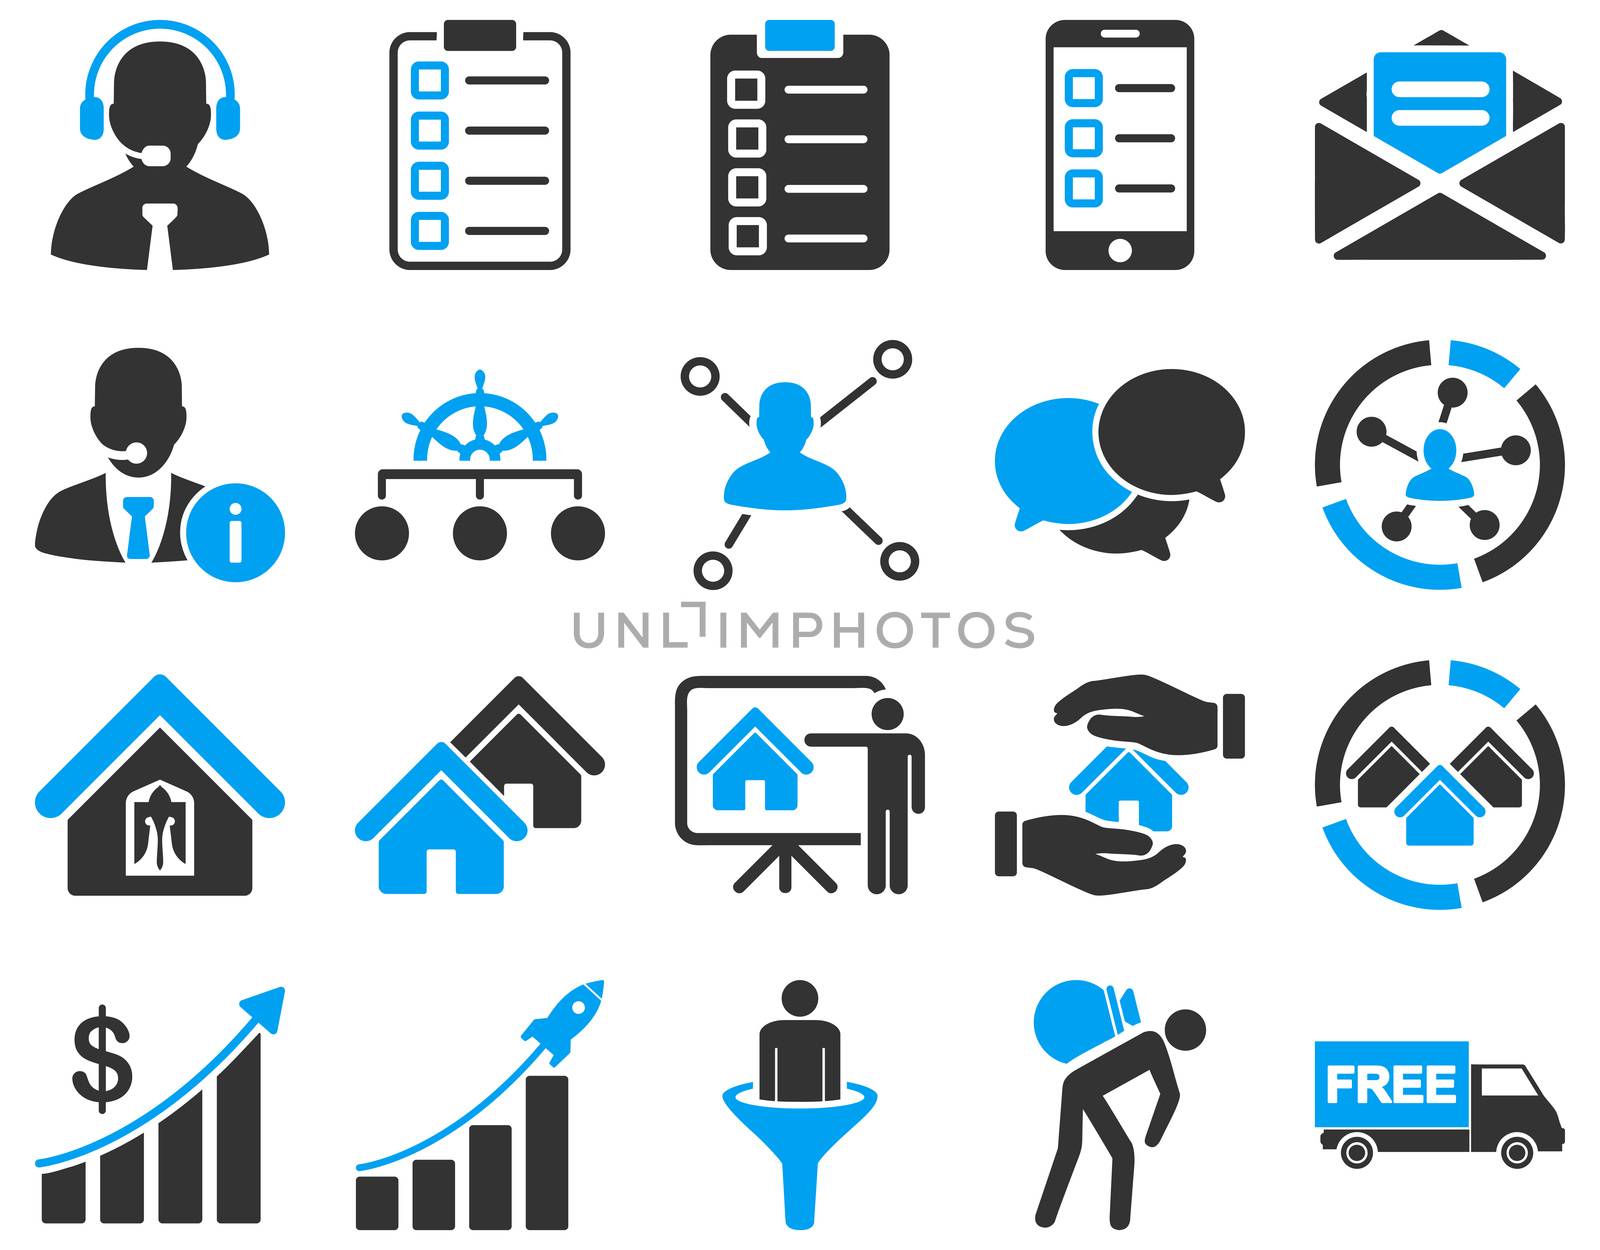 Business, sales, real estate icon set. These flat bicolor symbols use modern corporate light blue and gray colors. Images are isolated on a white background. Angles are rounded.